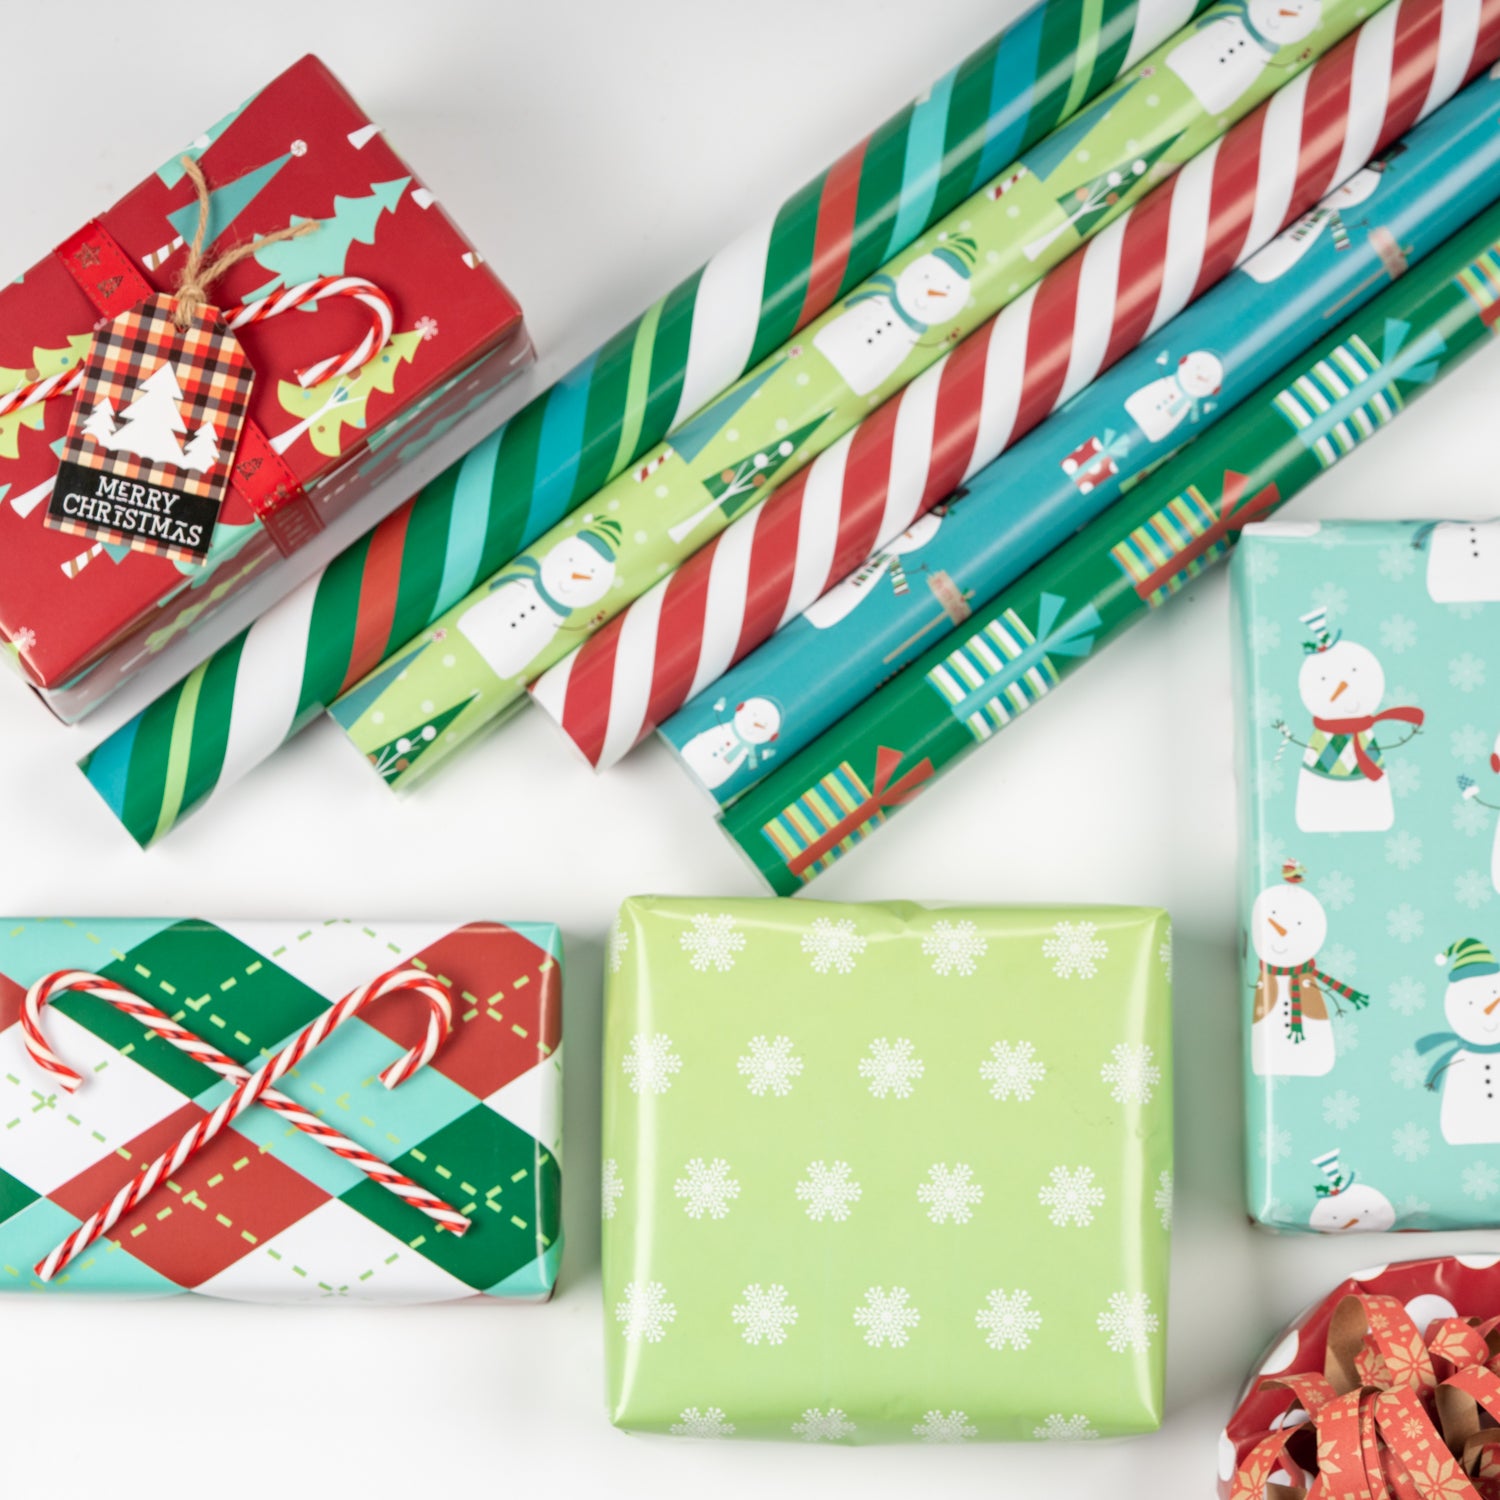 10 Ways to Decorate With Gift Wrap